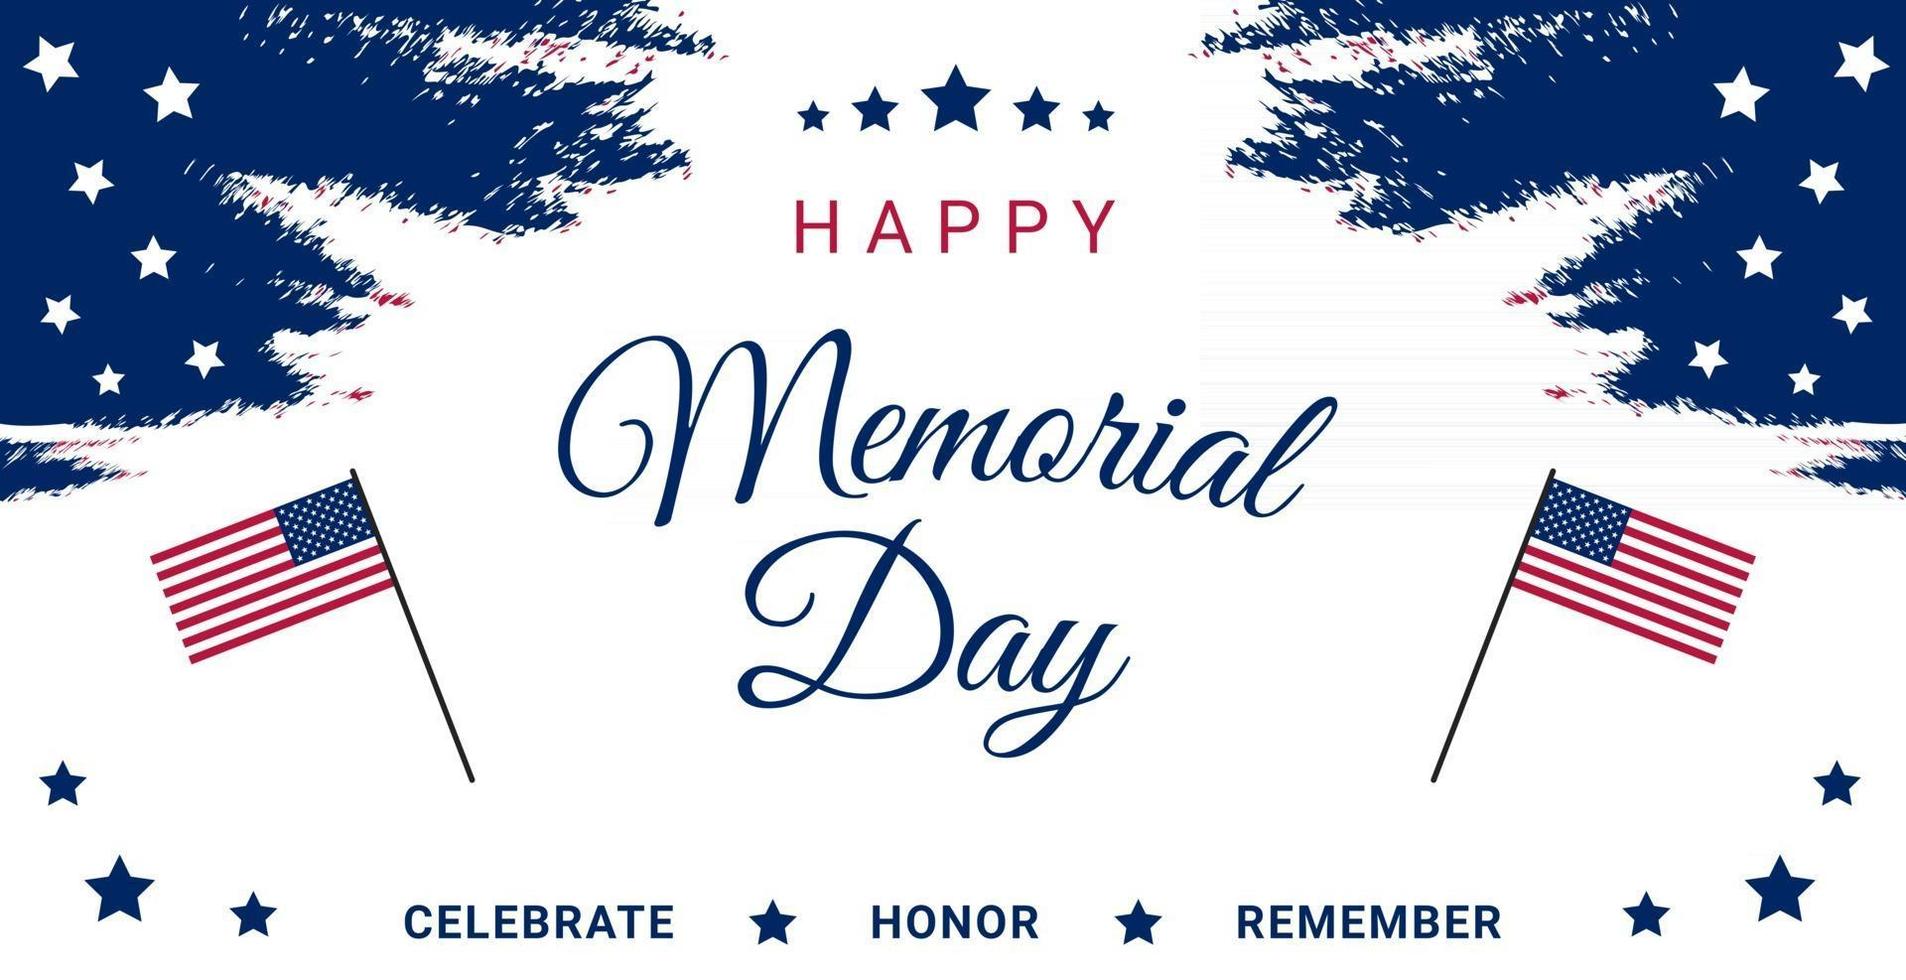 USA Memorial Day greeting card or banner with a flag and stars vector